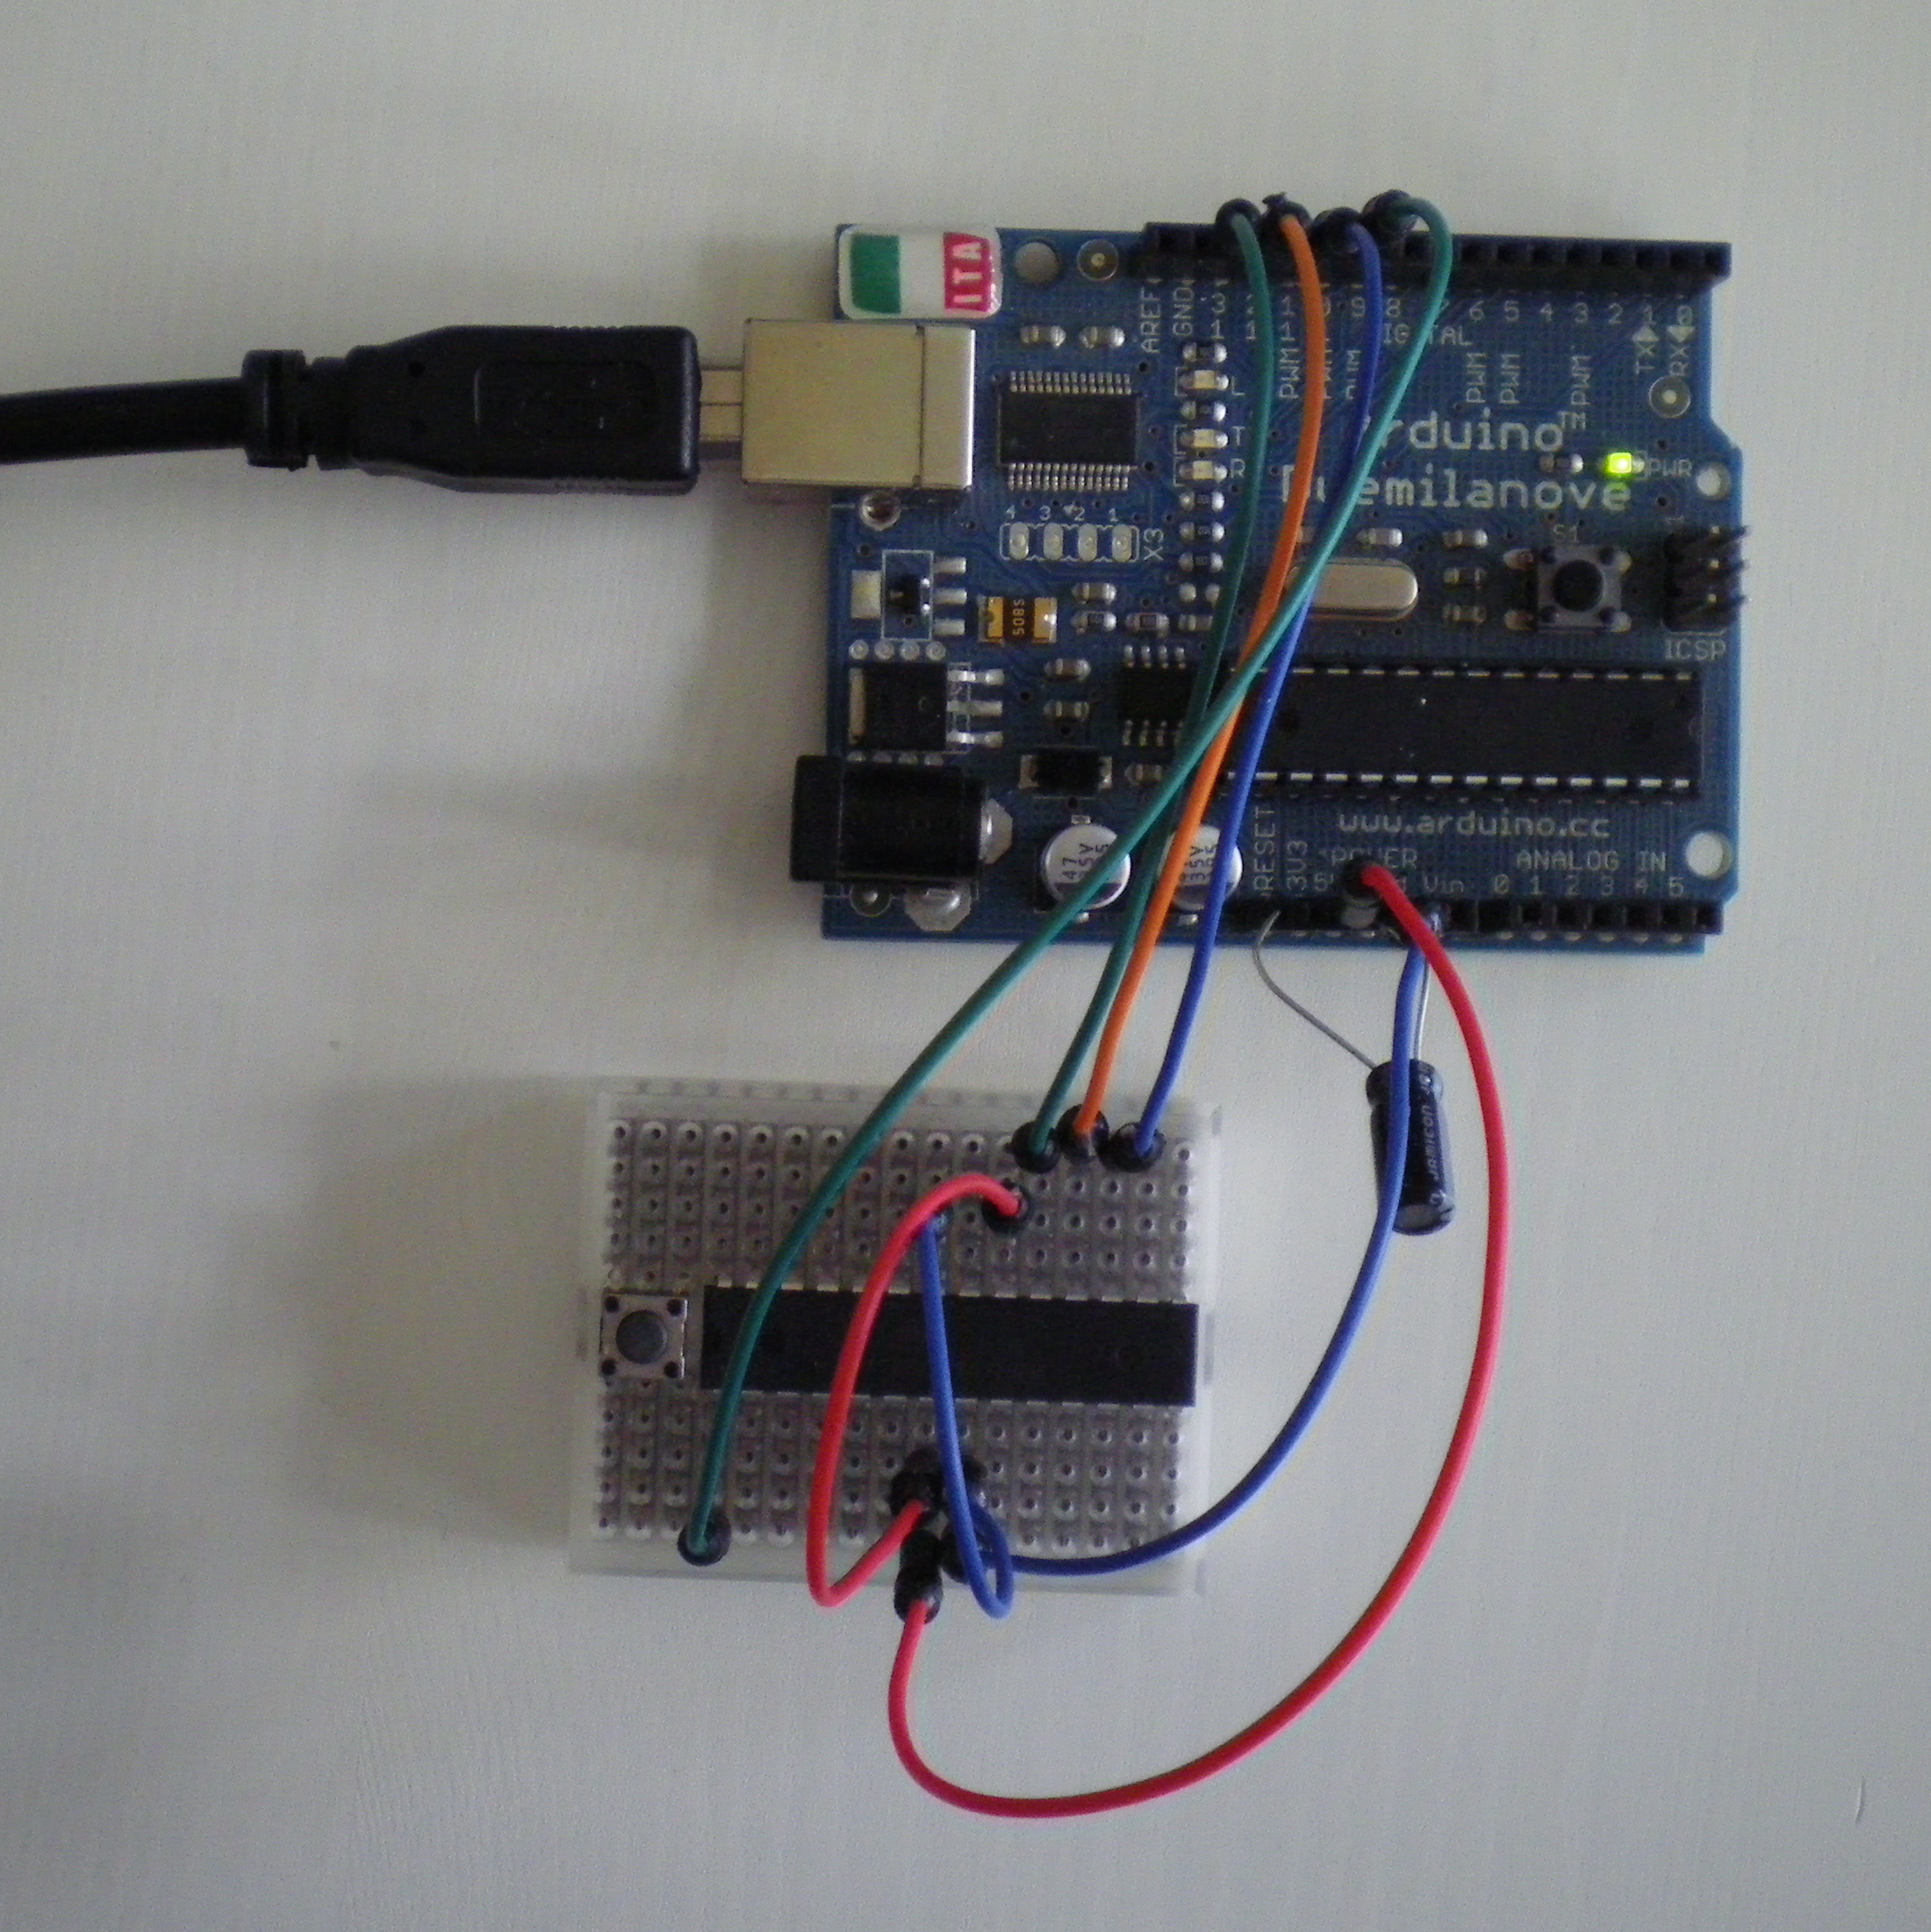 Connect AT mega168 to Arduino